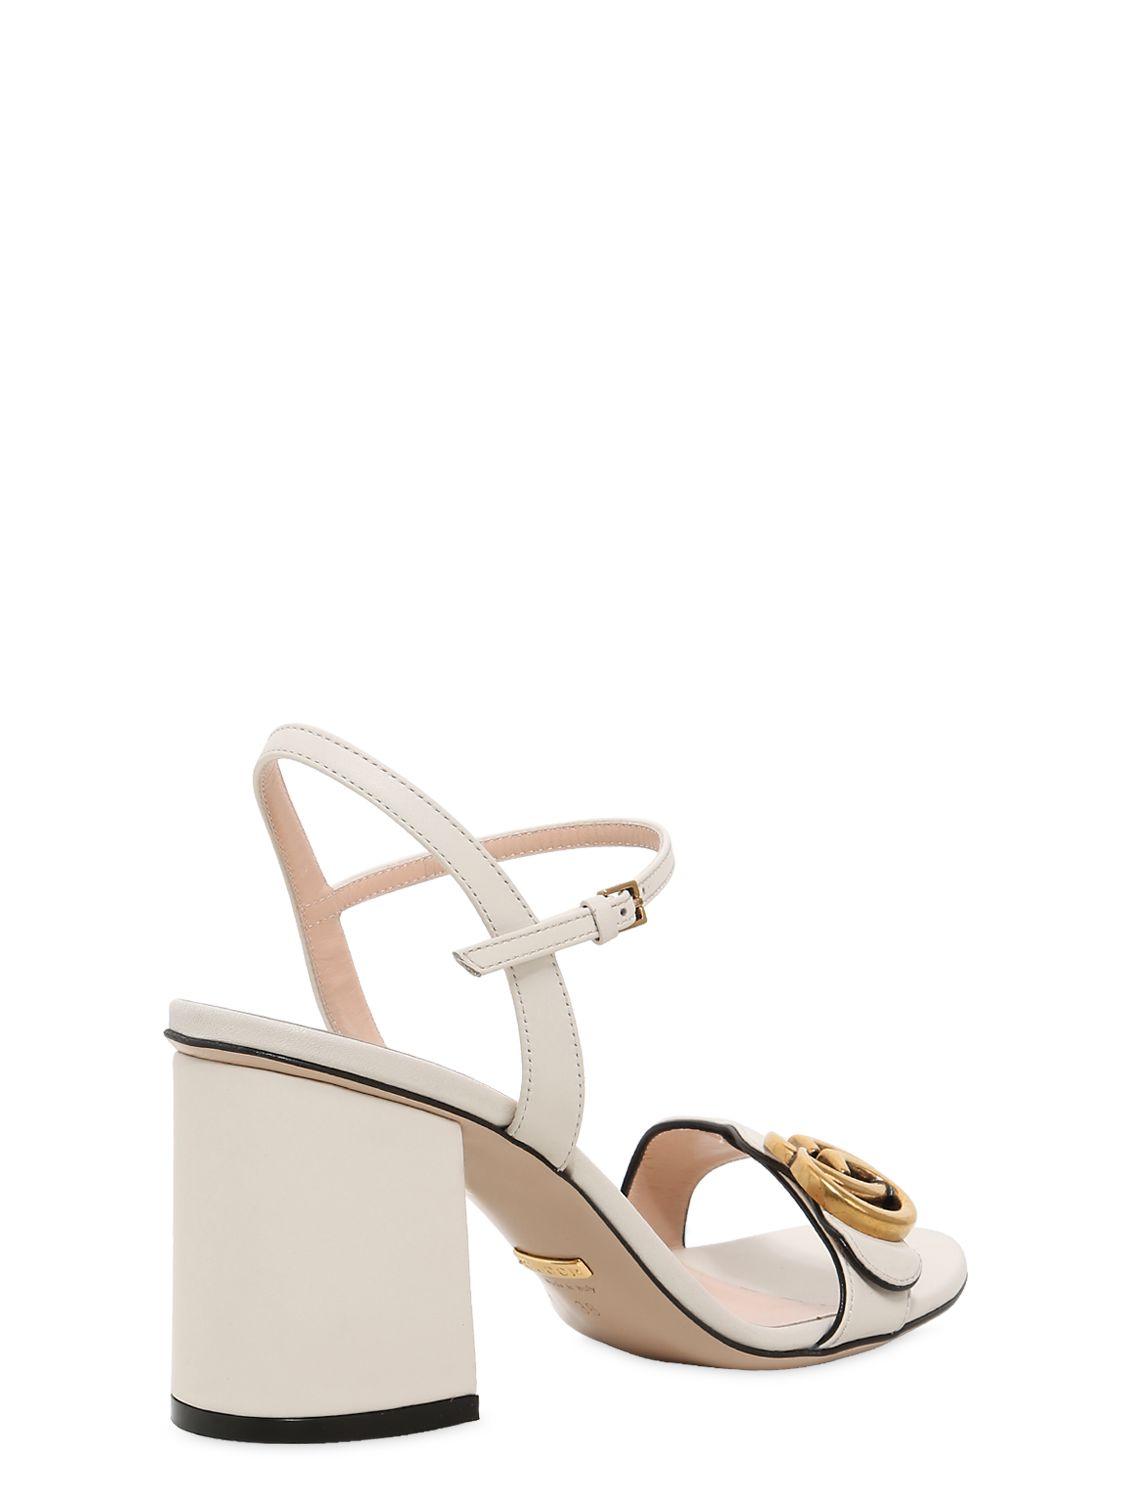 Gucci 75mm Marmont Gg Leather Sandals in White - Lyst